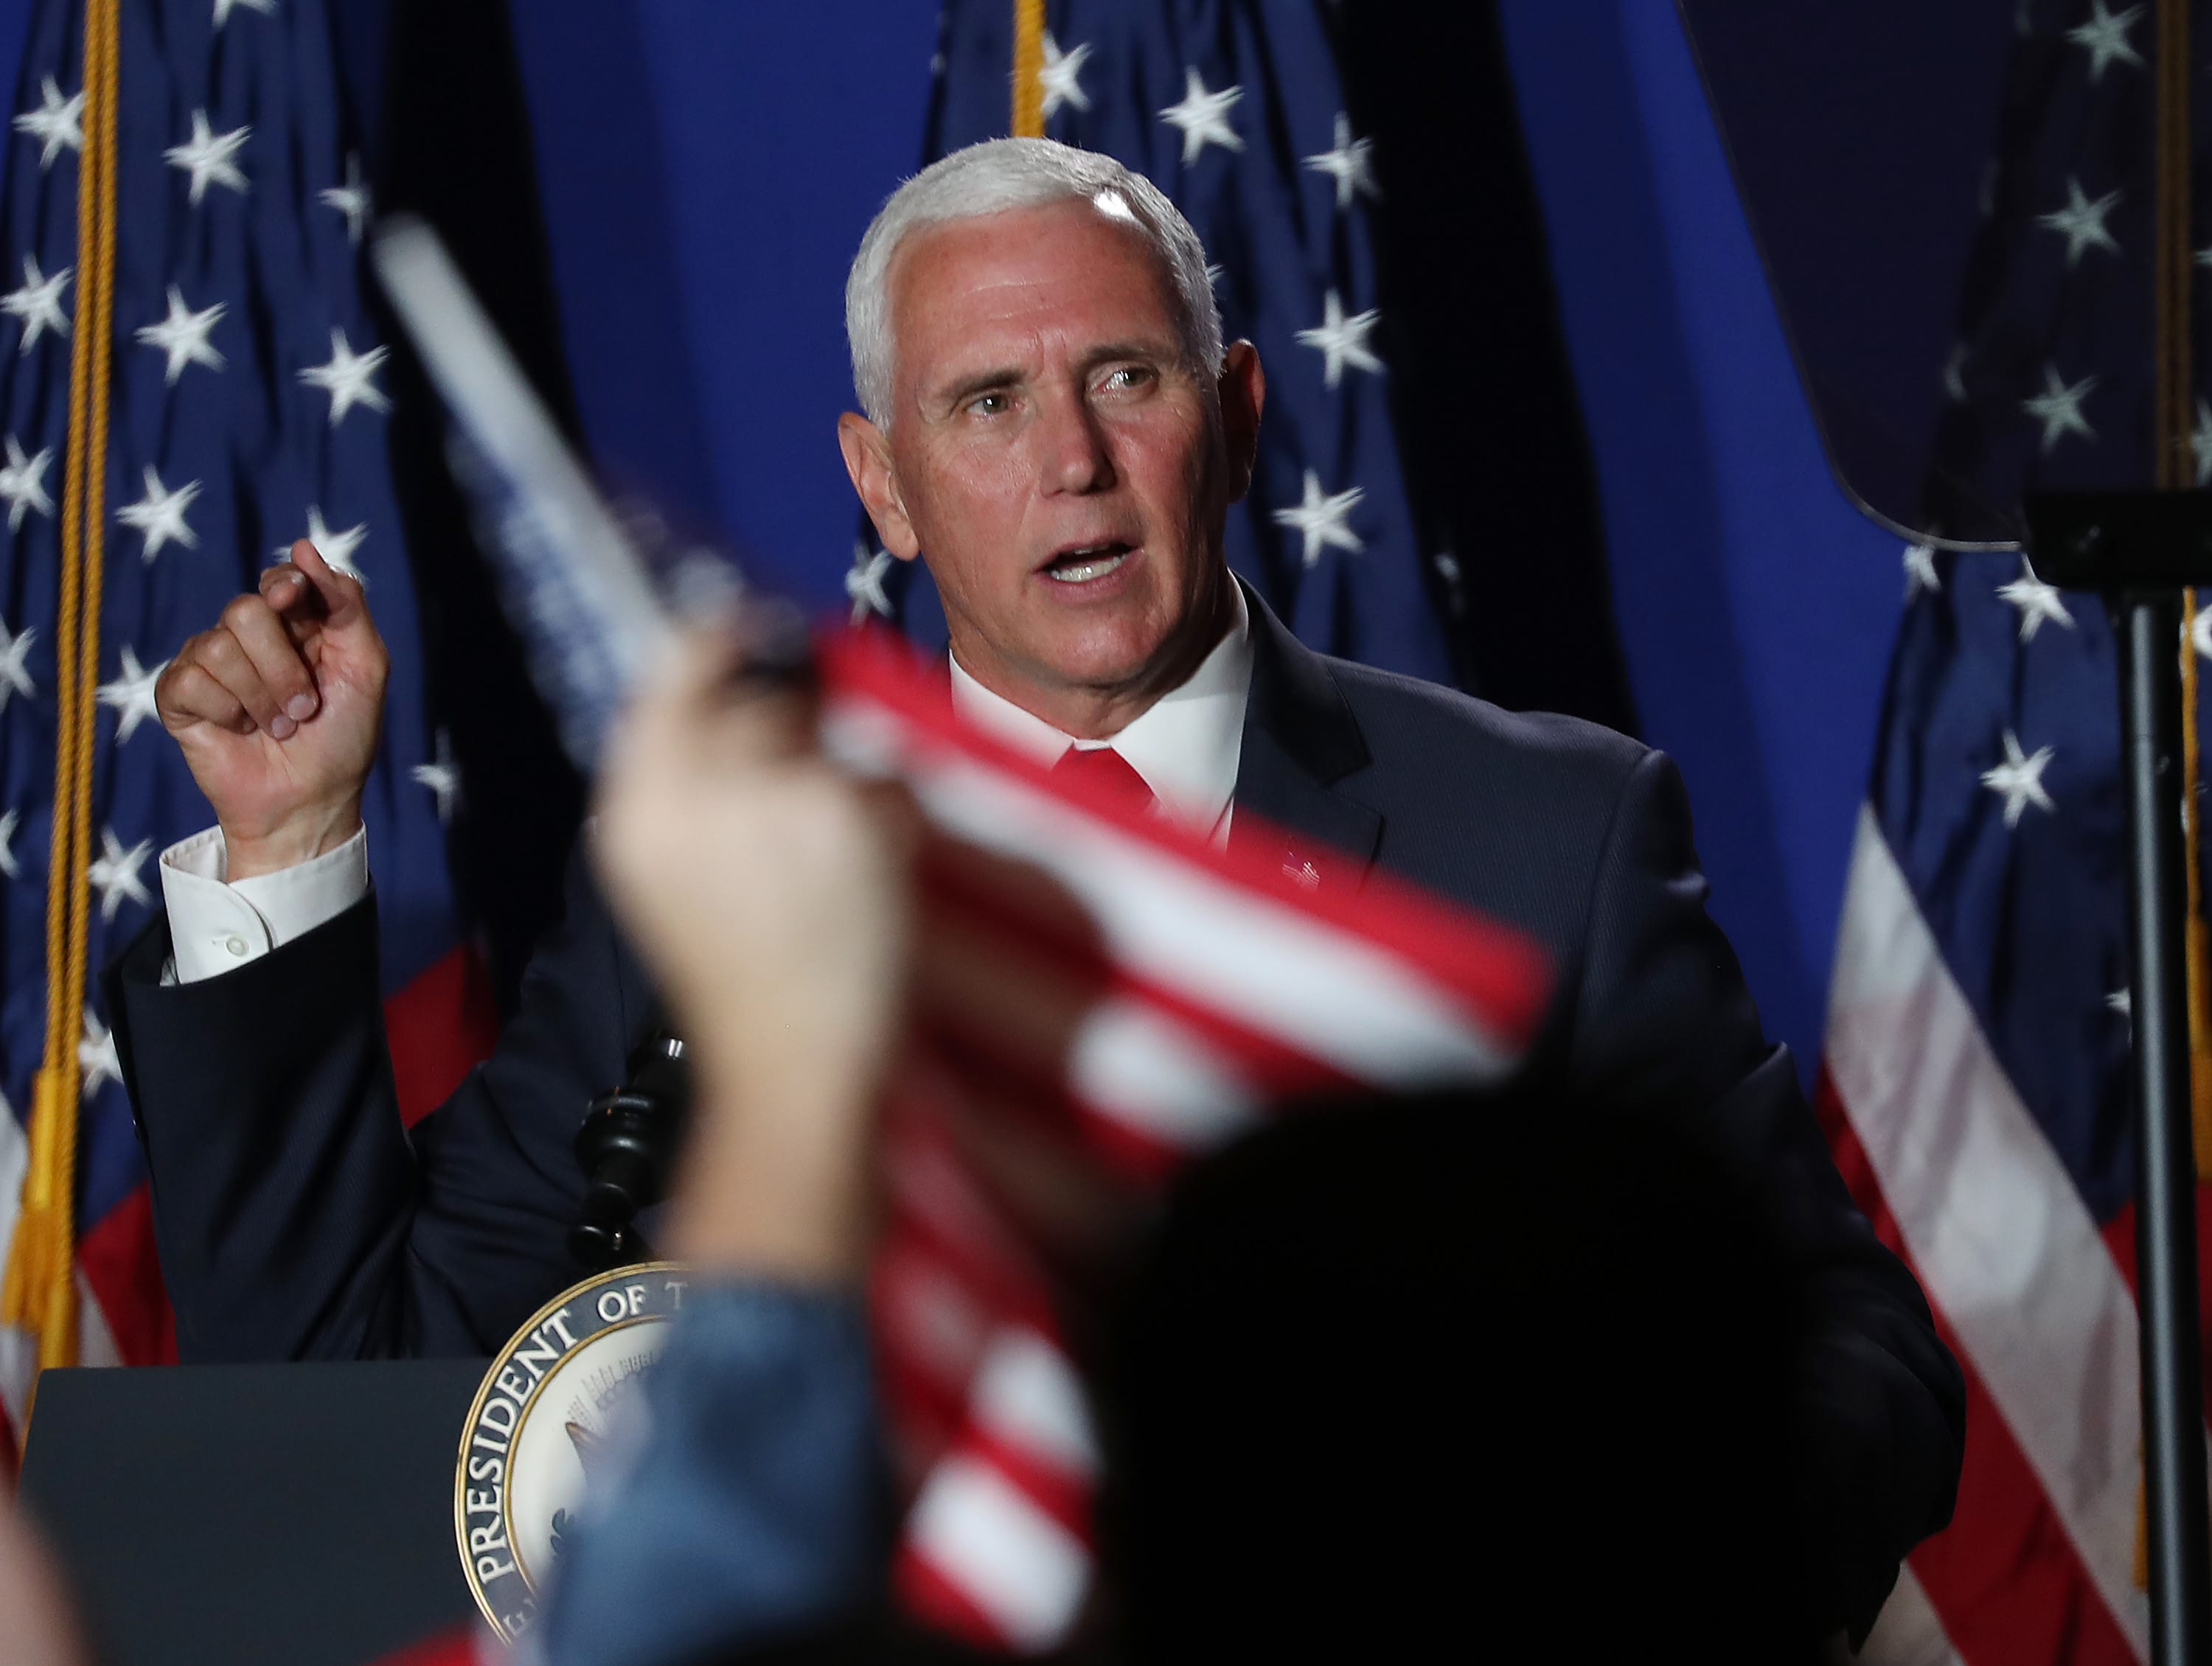 Migrants shout 'no shower!' as Pence visits Texas detention centers